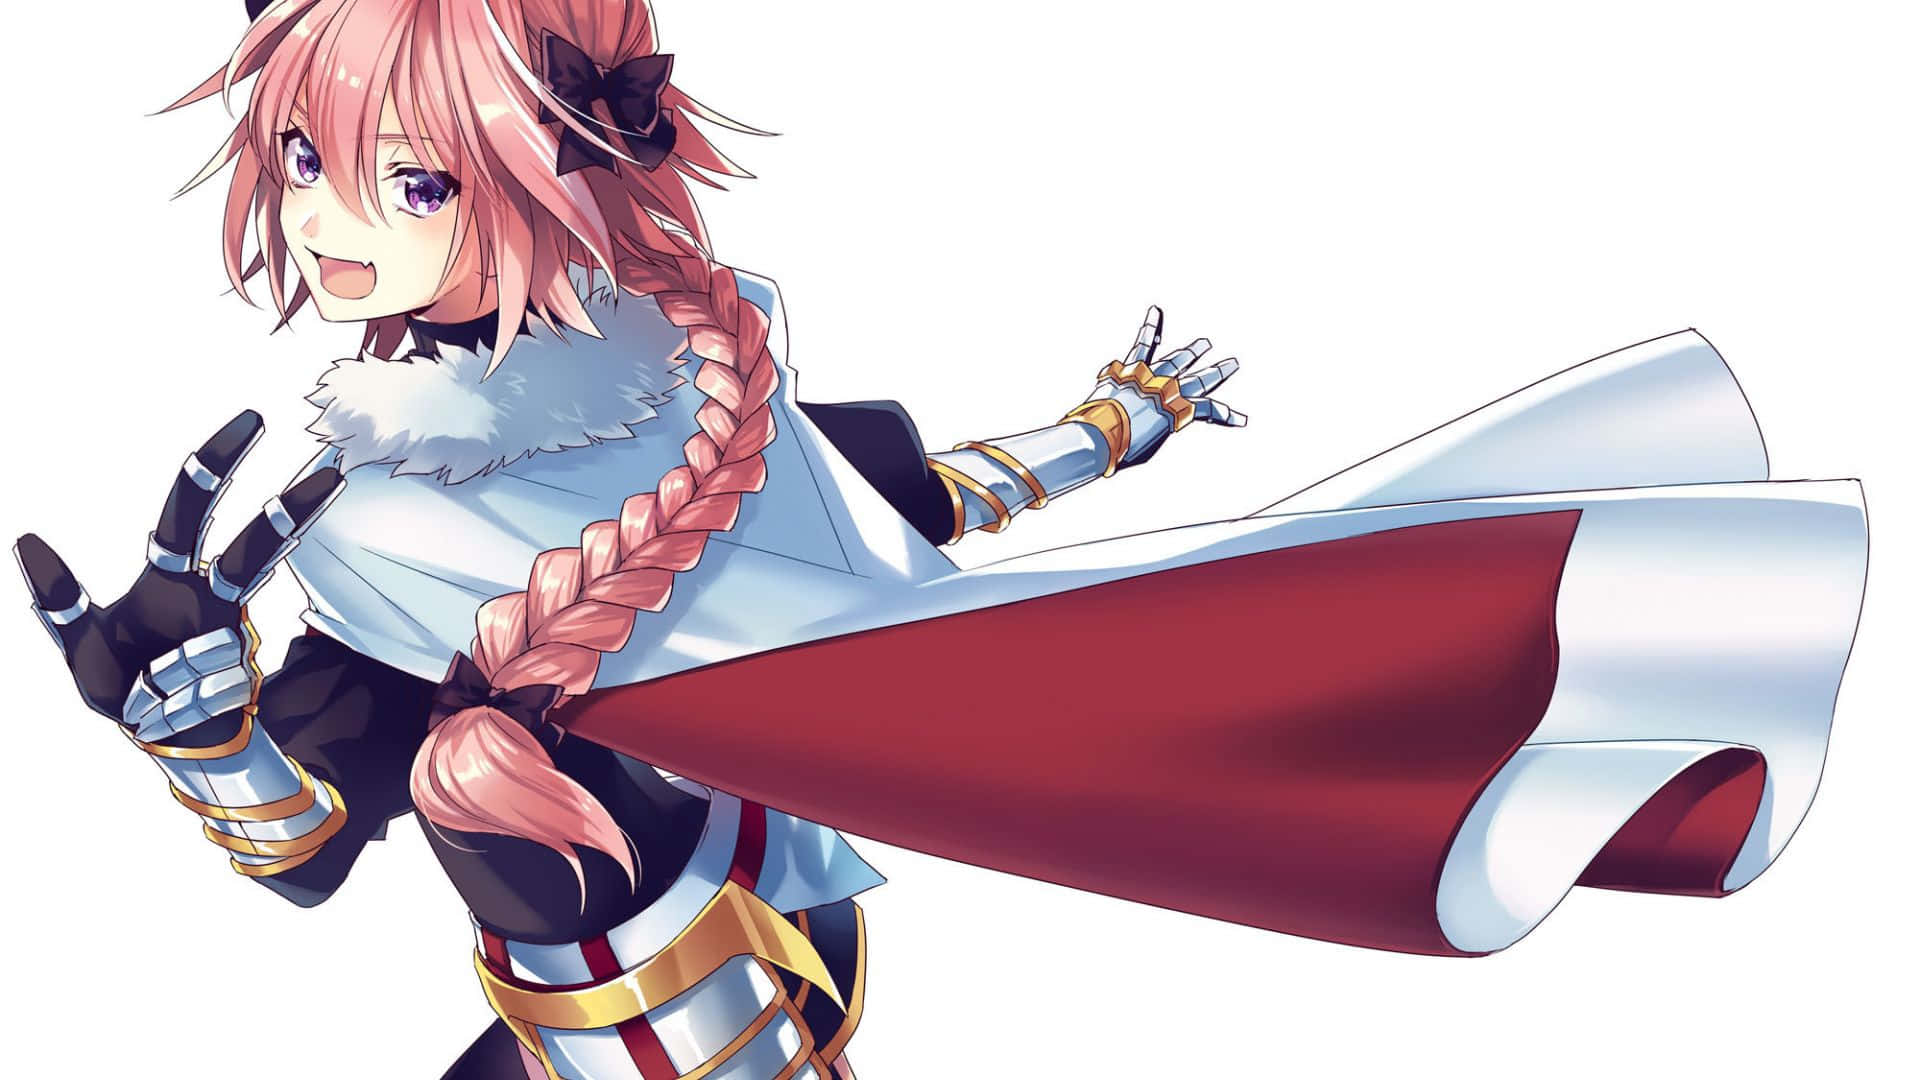 Astolfo, the noble paladin of the Round Table